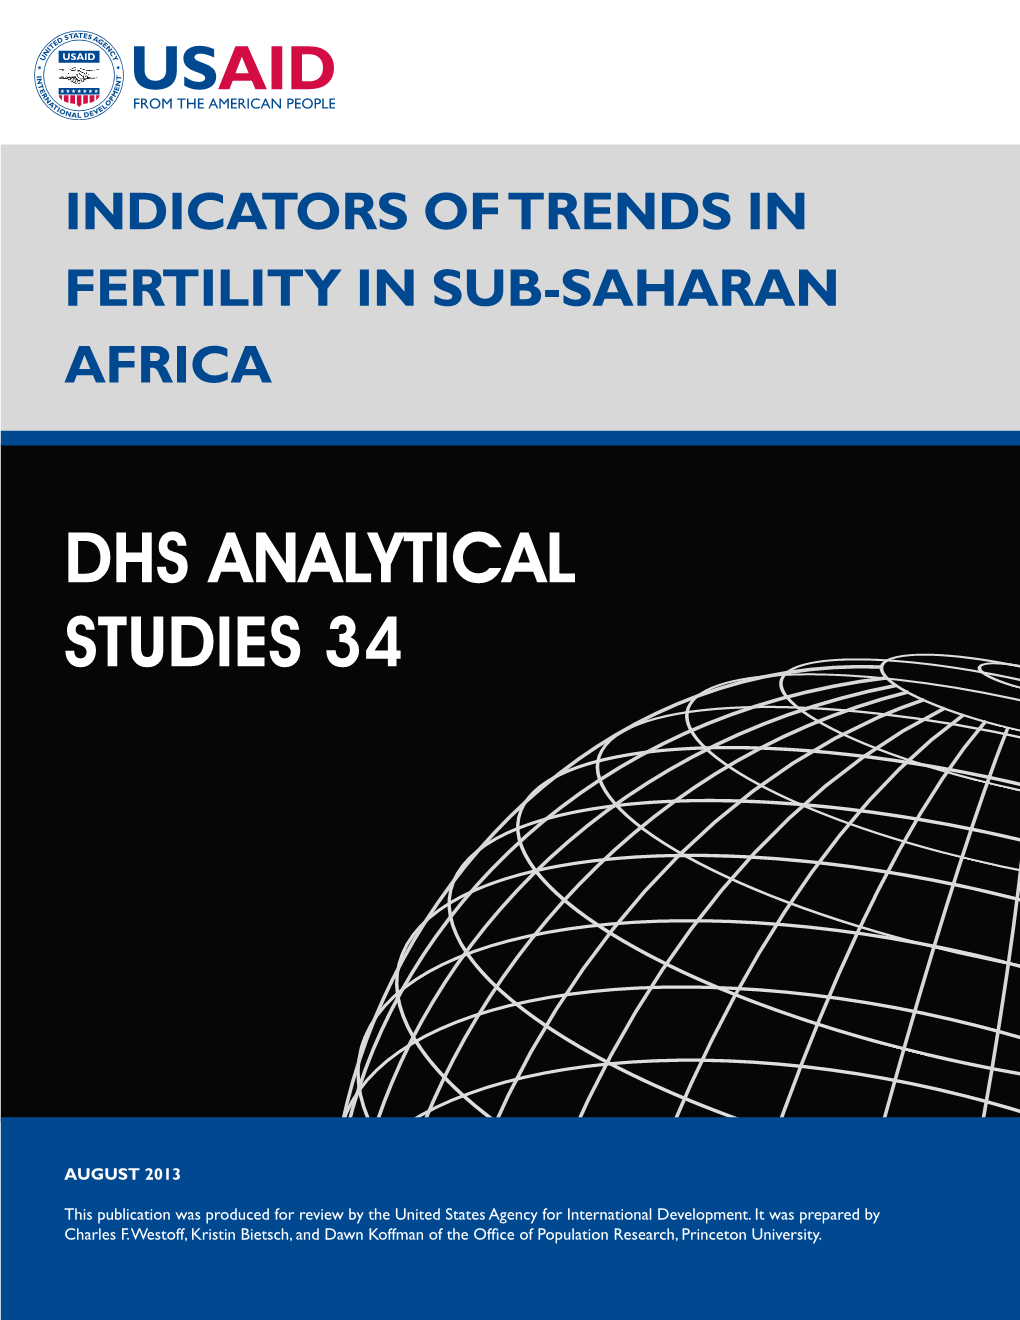 Indicators of Trends in Fertility in Sub-Saharan Africa